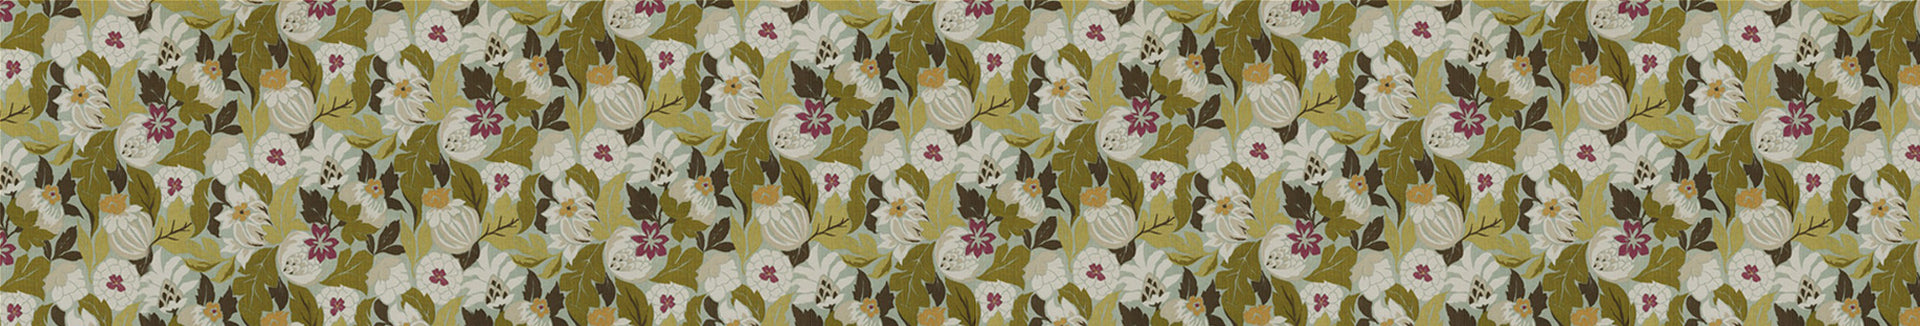 Perroquet Fabric Collection